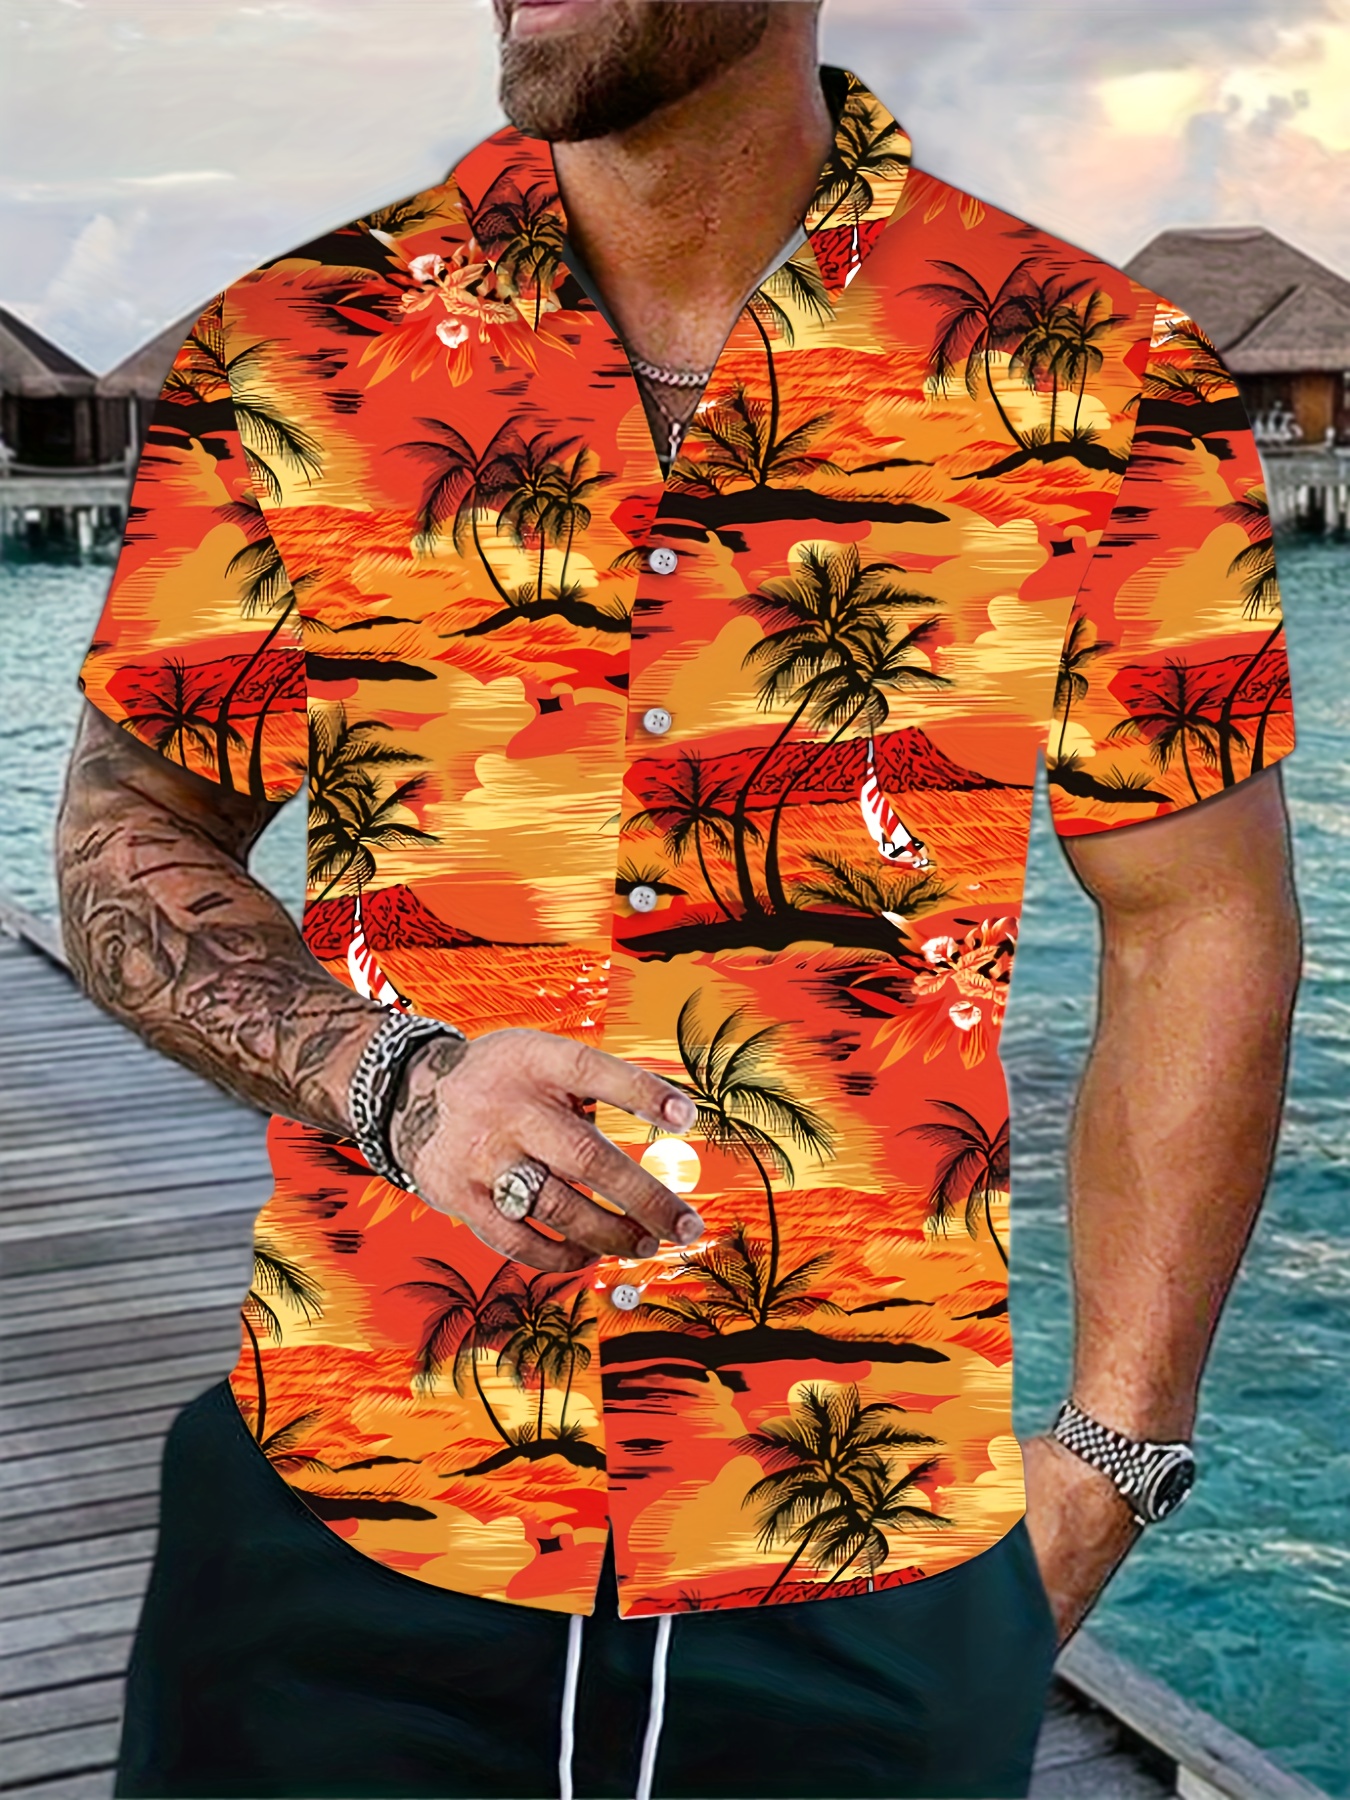 Men's Hawaiian Shirt - Tropical Island Pattern, Short Sleeves, Casual  Button Up for Vacation and Beach Resorts